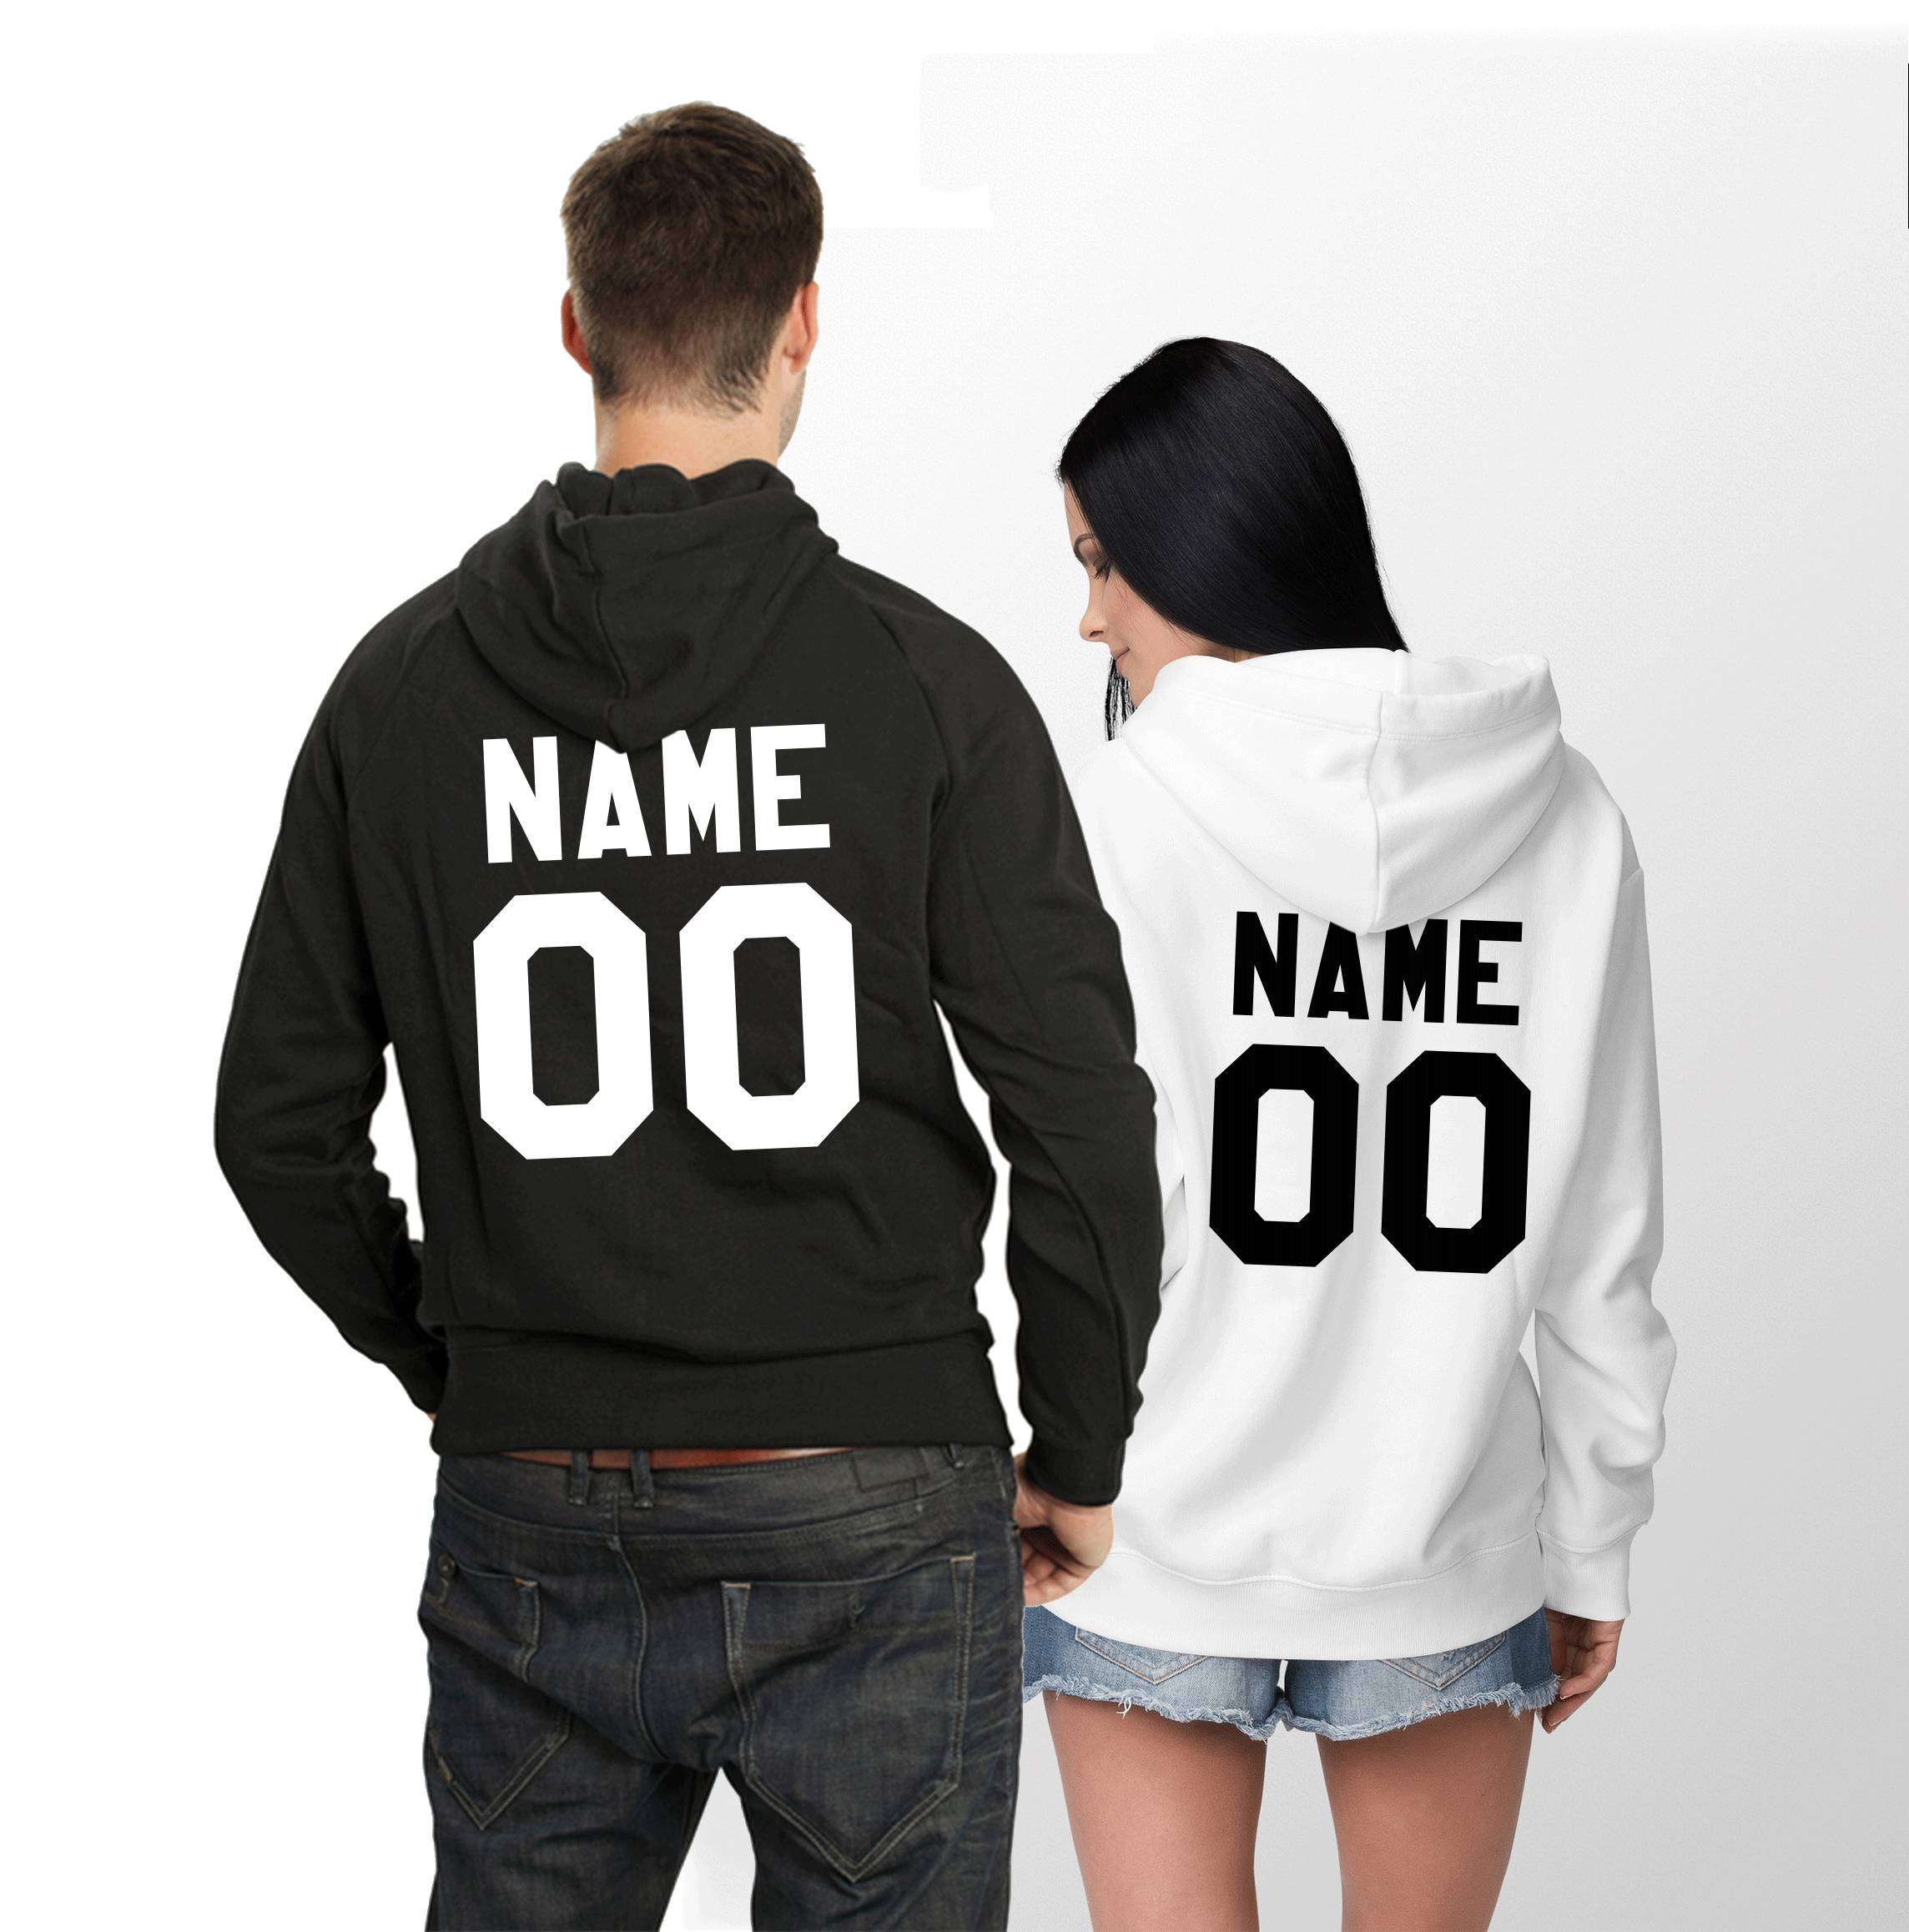 Personalized Matching Couples Hoodies - Awesome Matching Shirts for ...